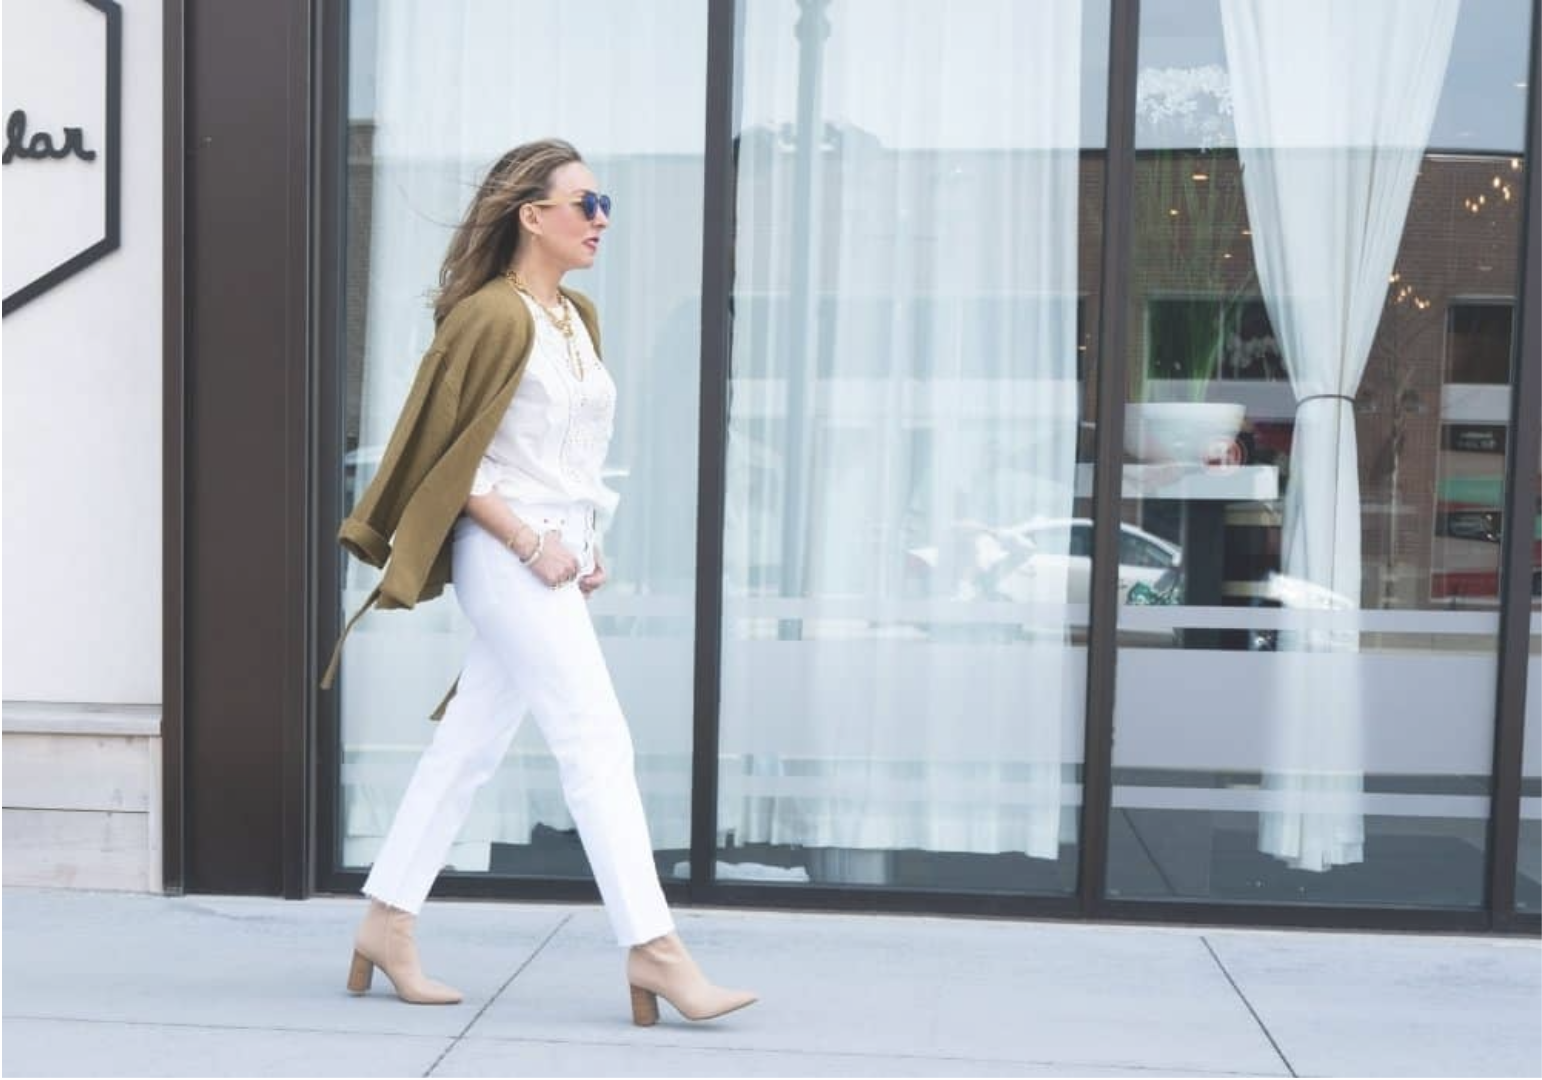 Yes, you can wear white after labor day! White jeans / pants for